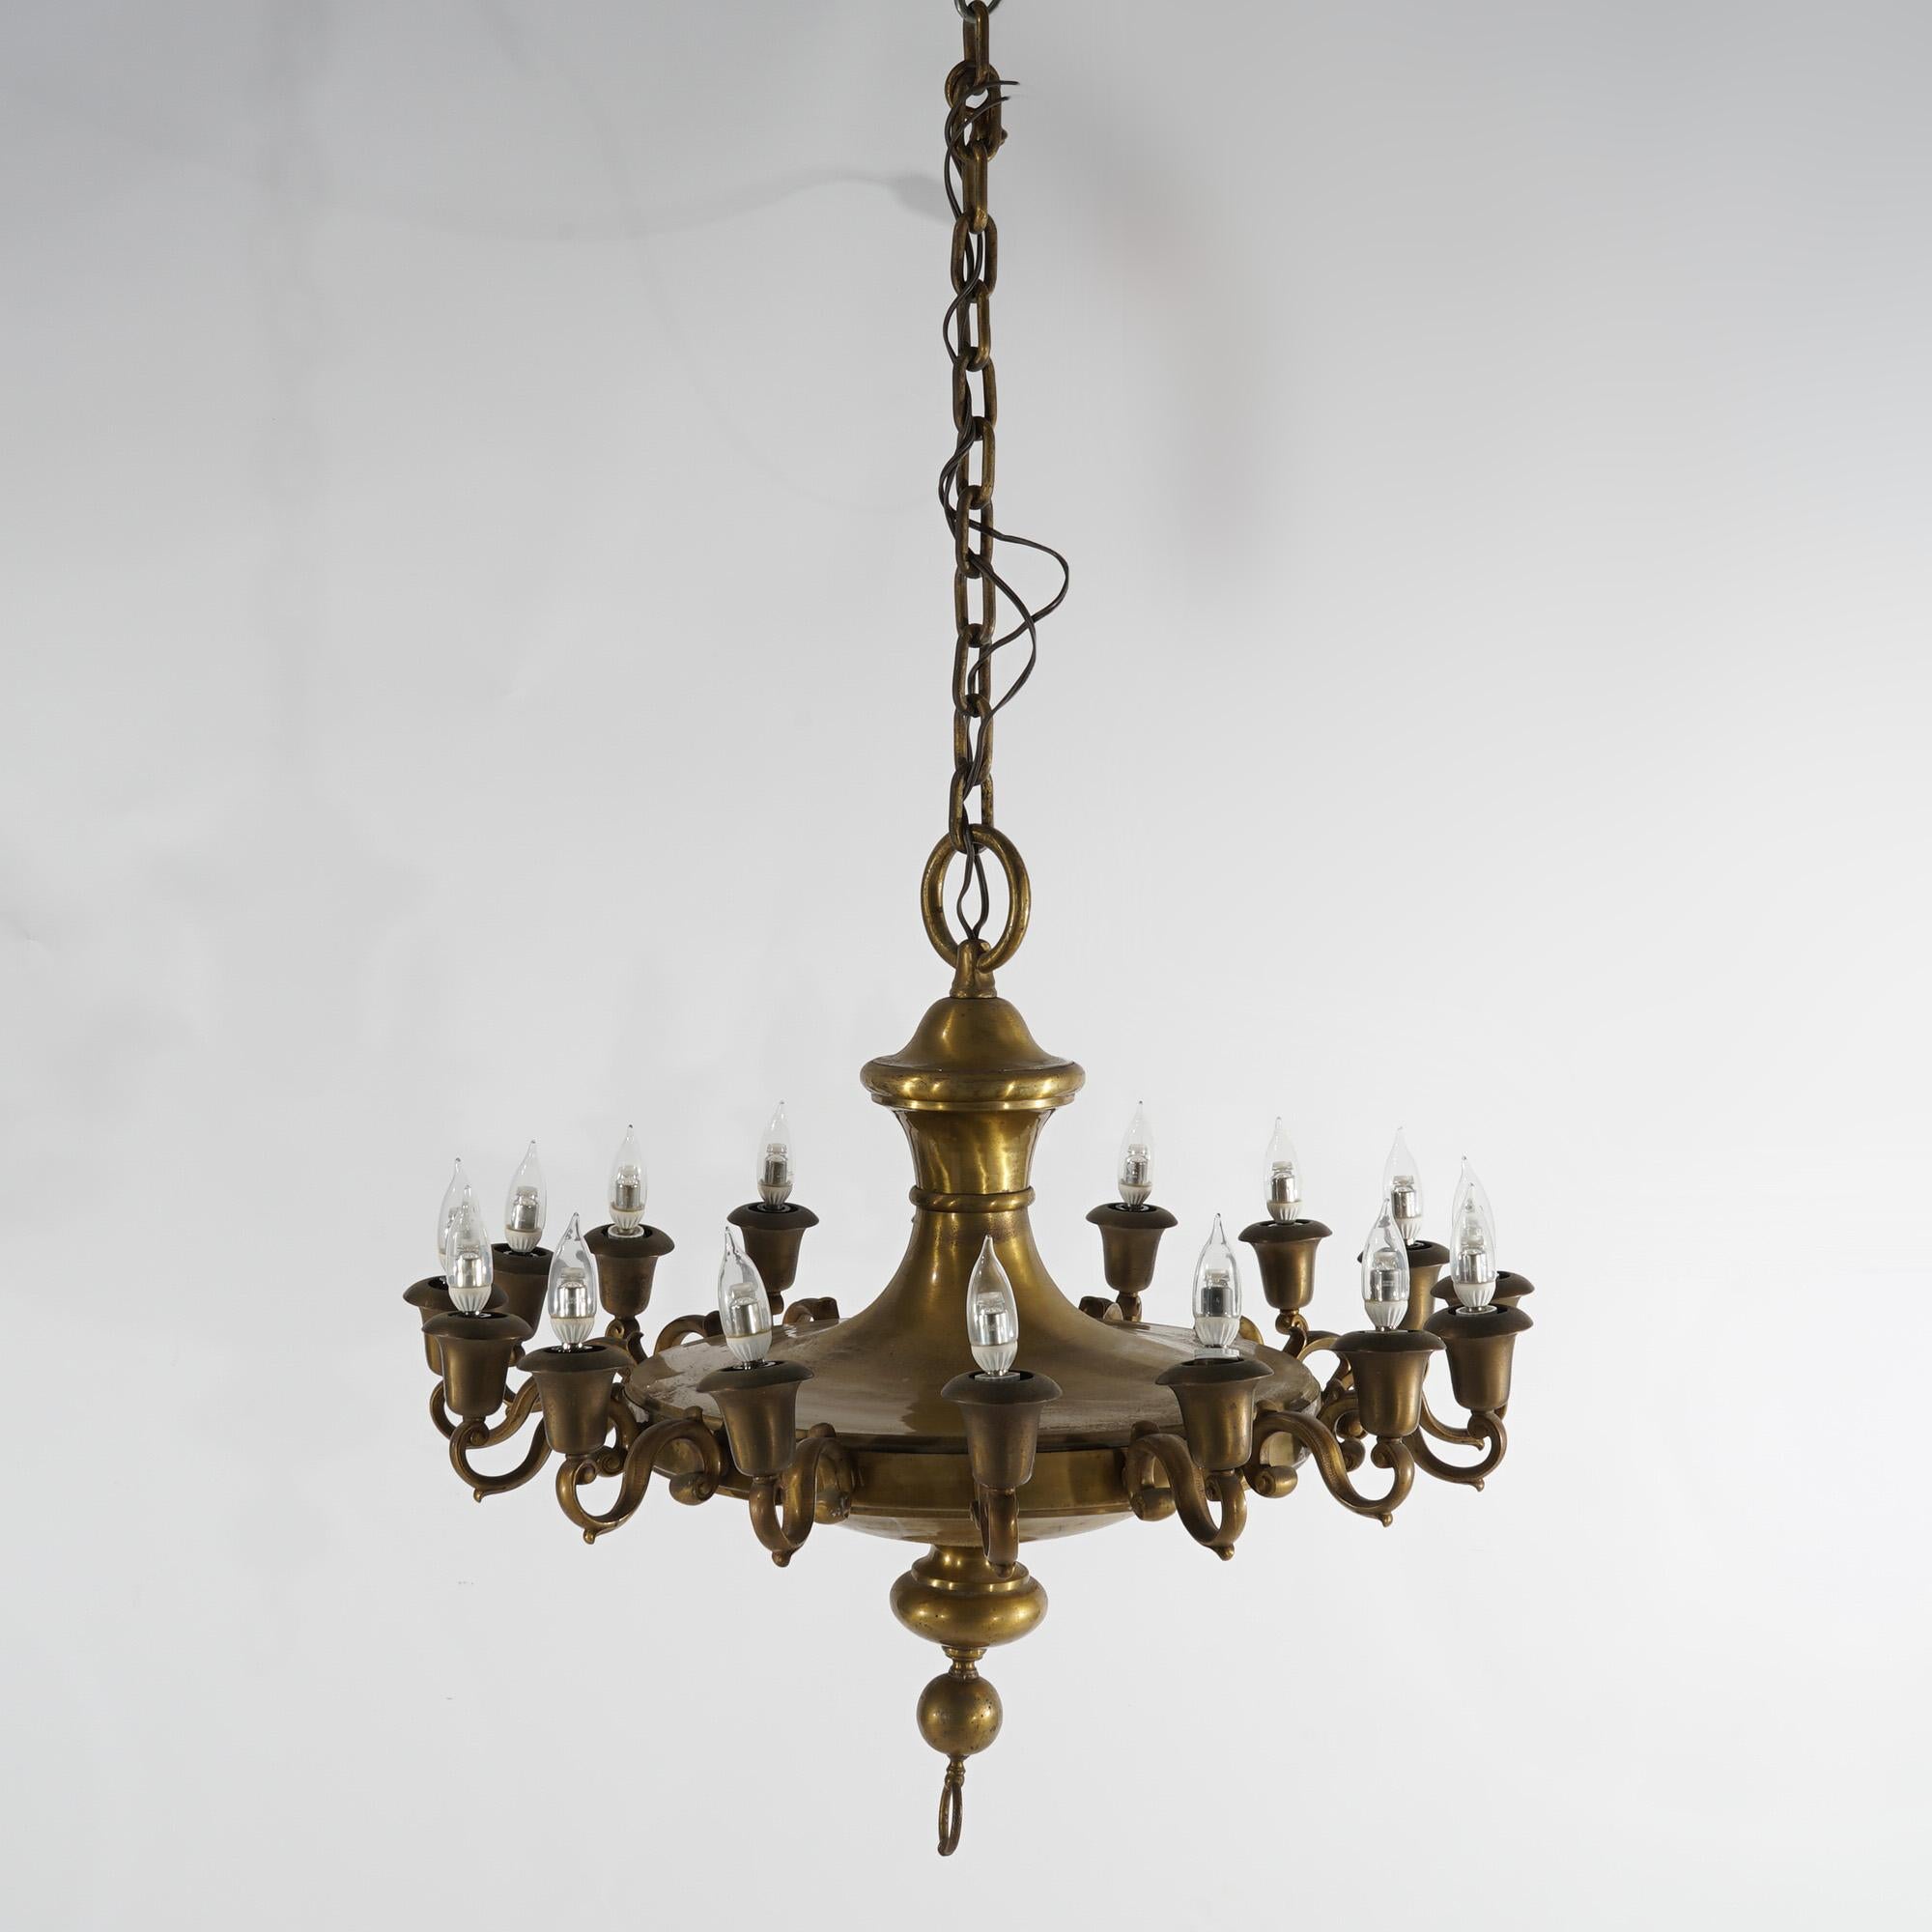 An antique and large French Empire style pan chandelier offers brass construction with sixteen scroll form arms terminating in lights, ebonized elements, c1930

Measures - 53